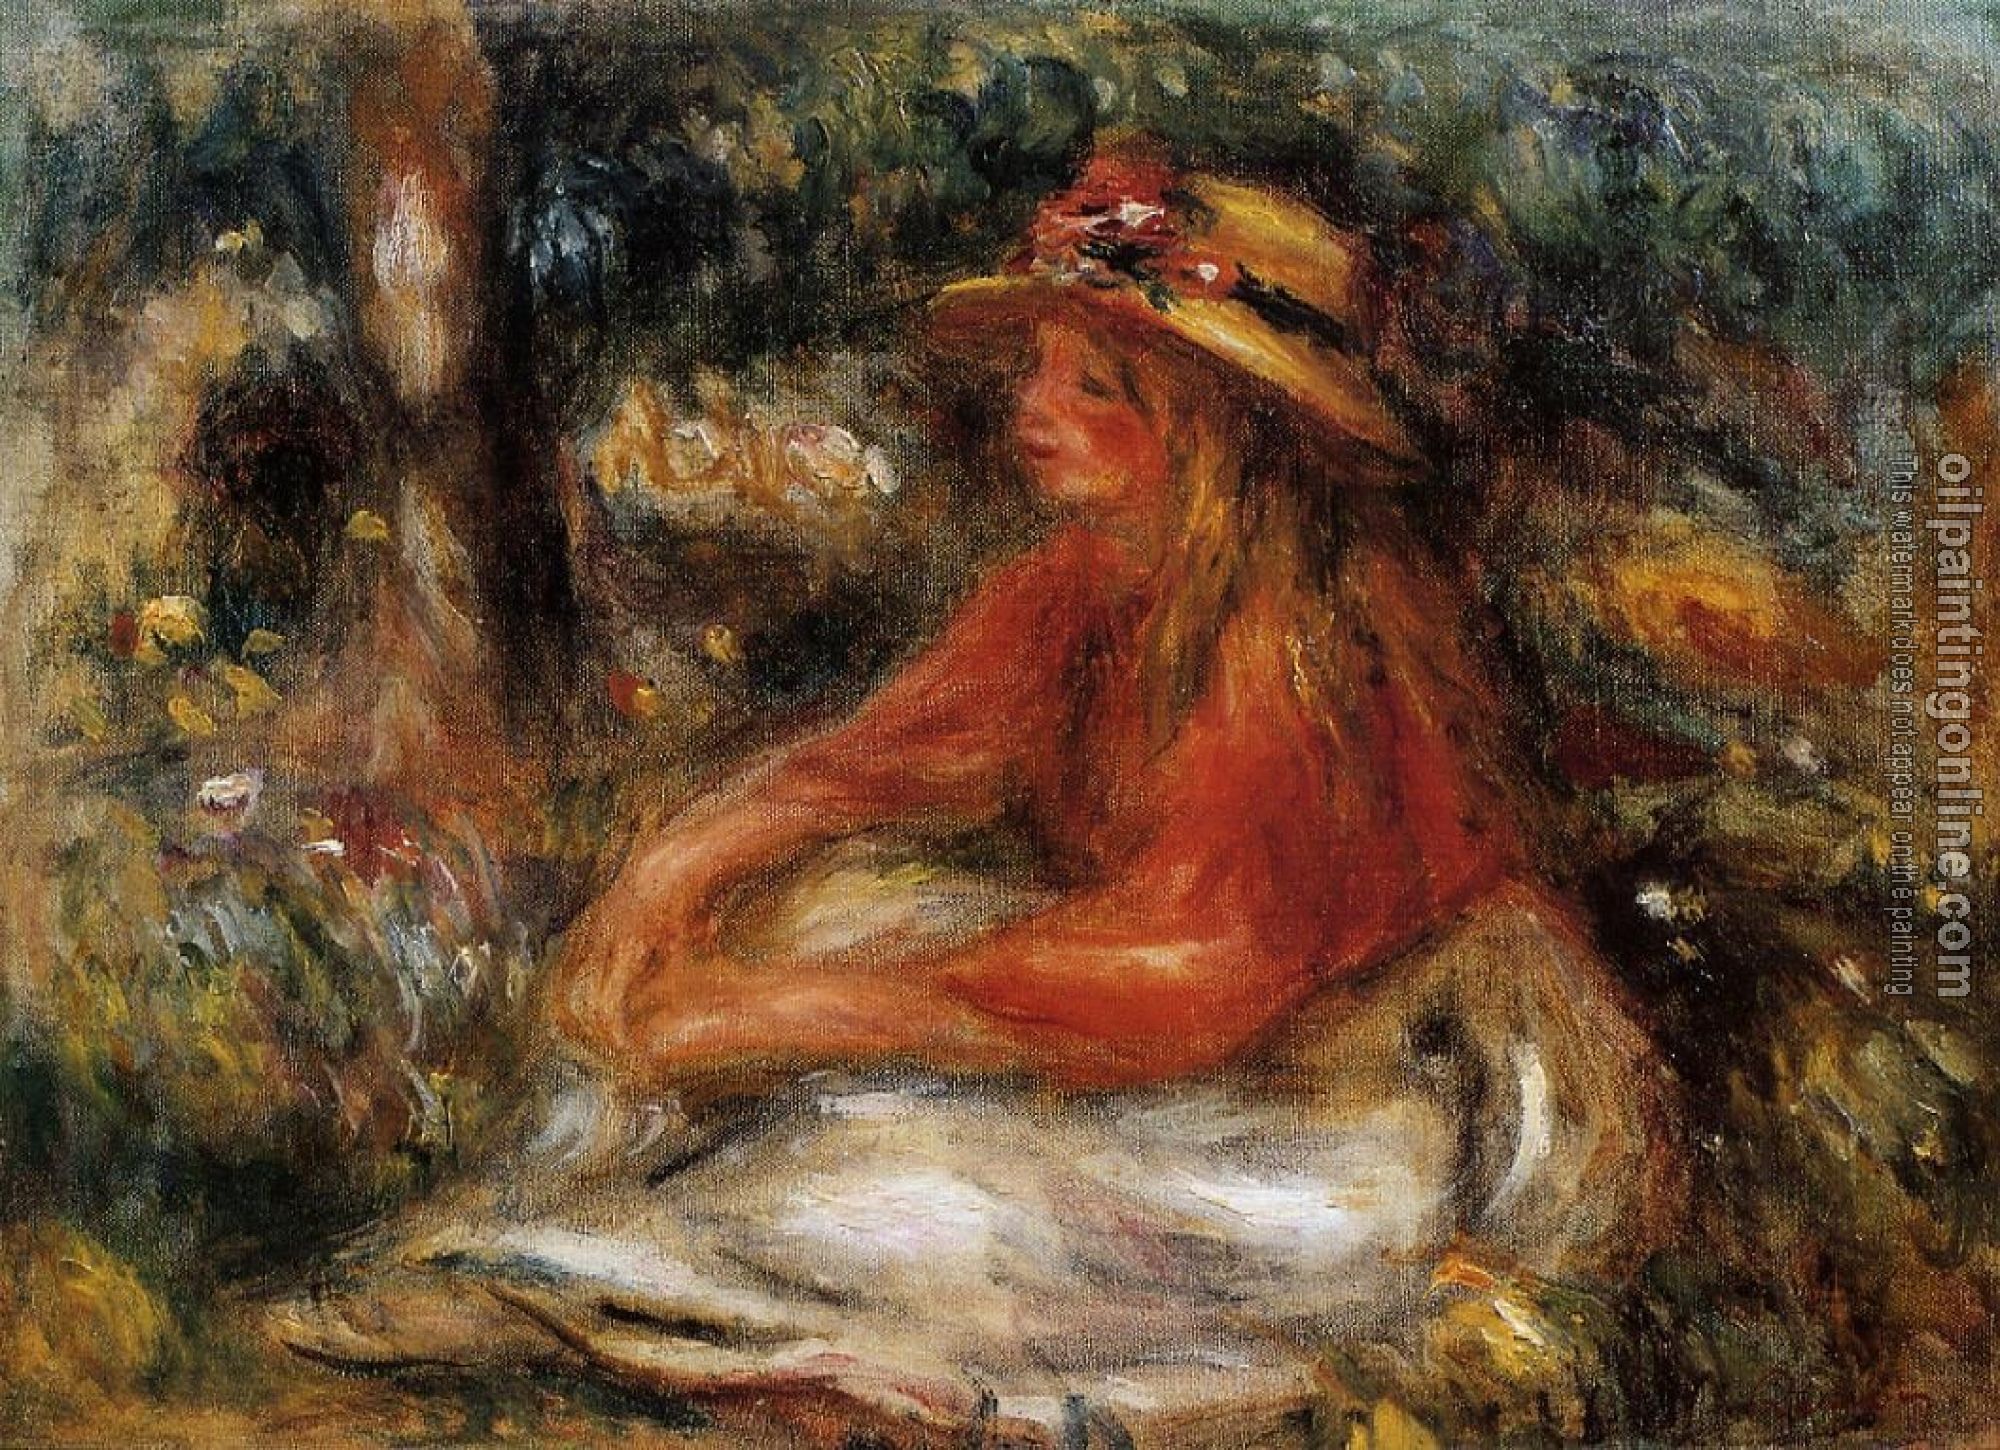 Renoir, Pierre Auguste - Young Woman Seated on the Grass